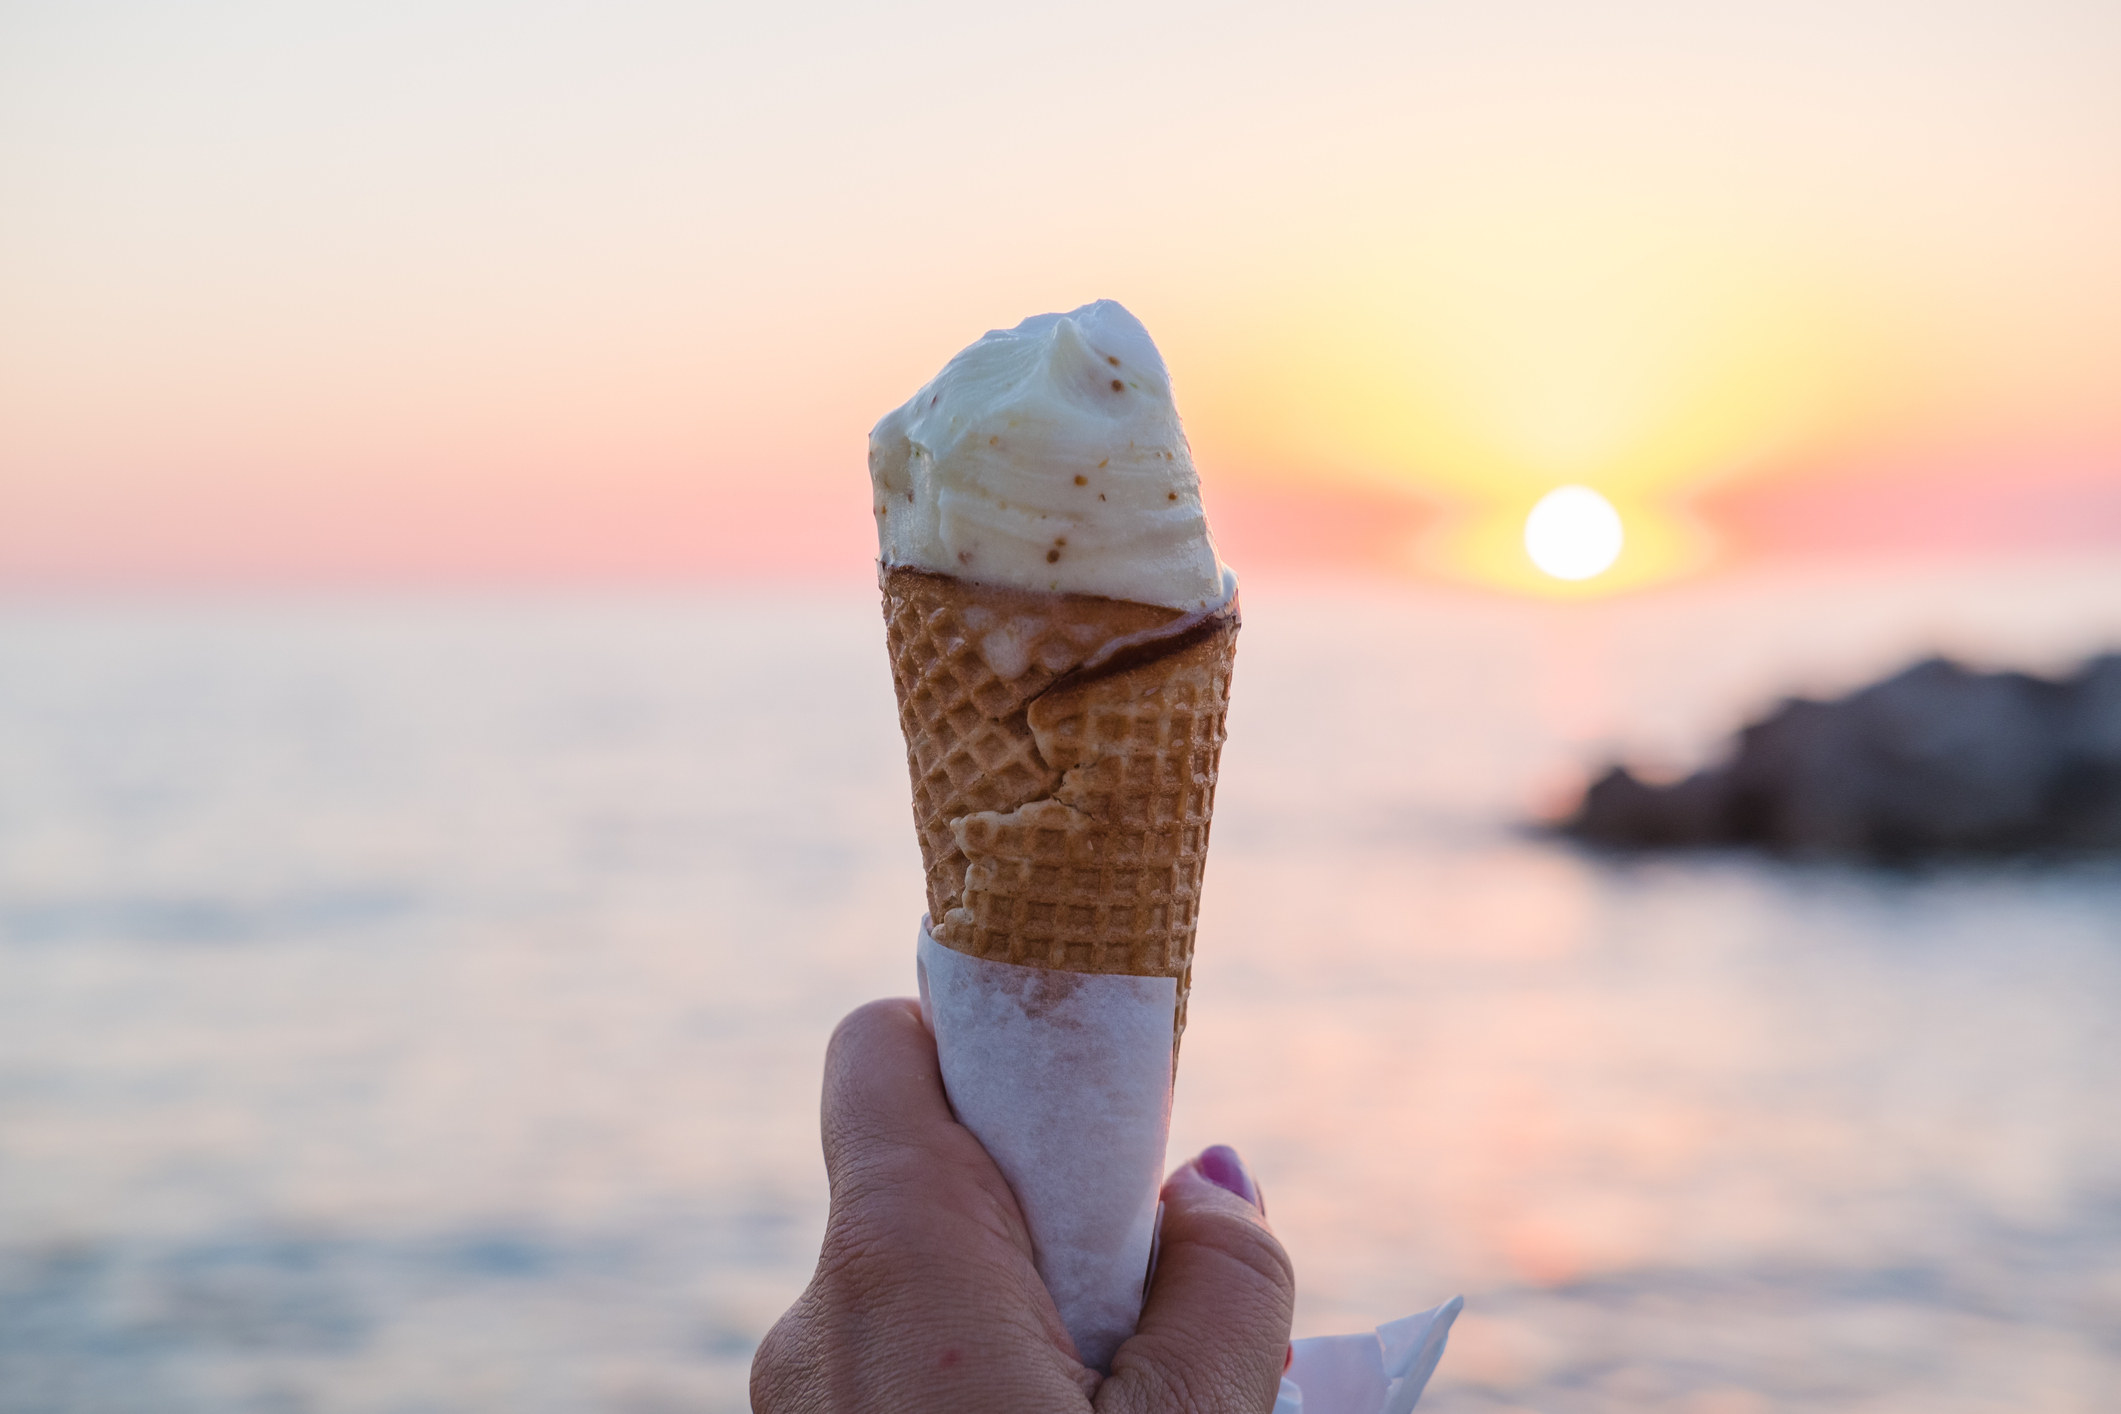 a person holding an ice cream cone in front of a scenic sunset by a lake 